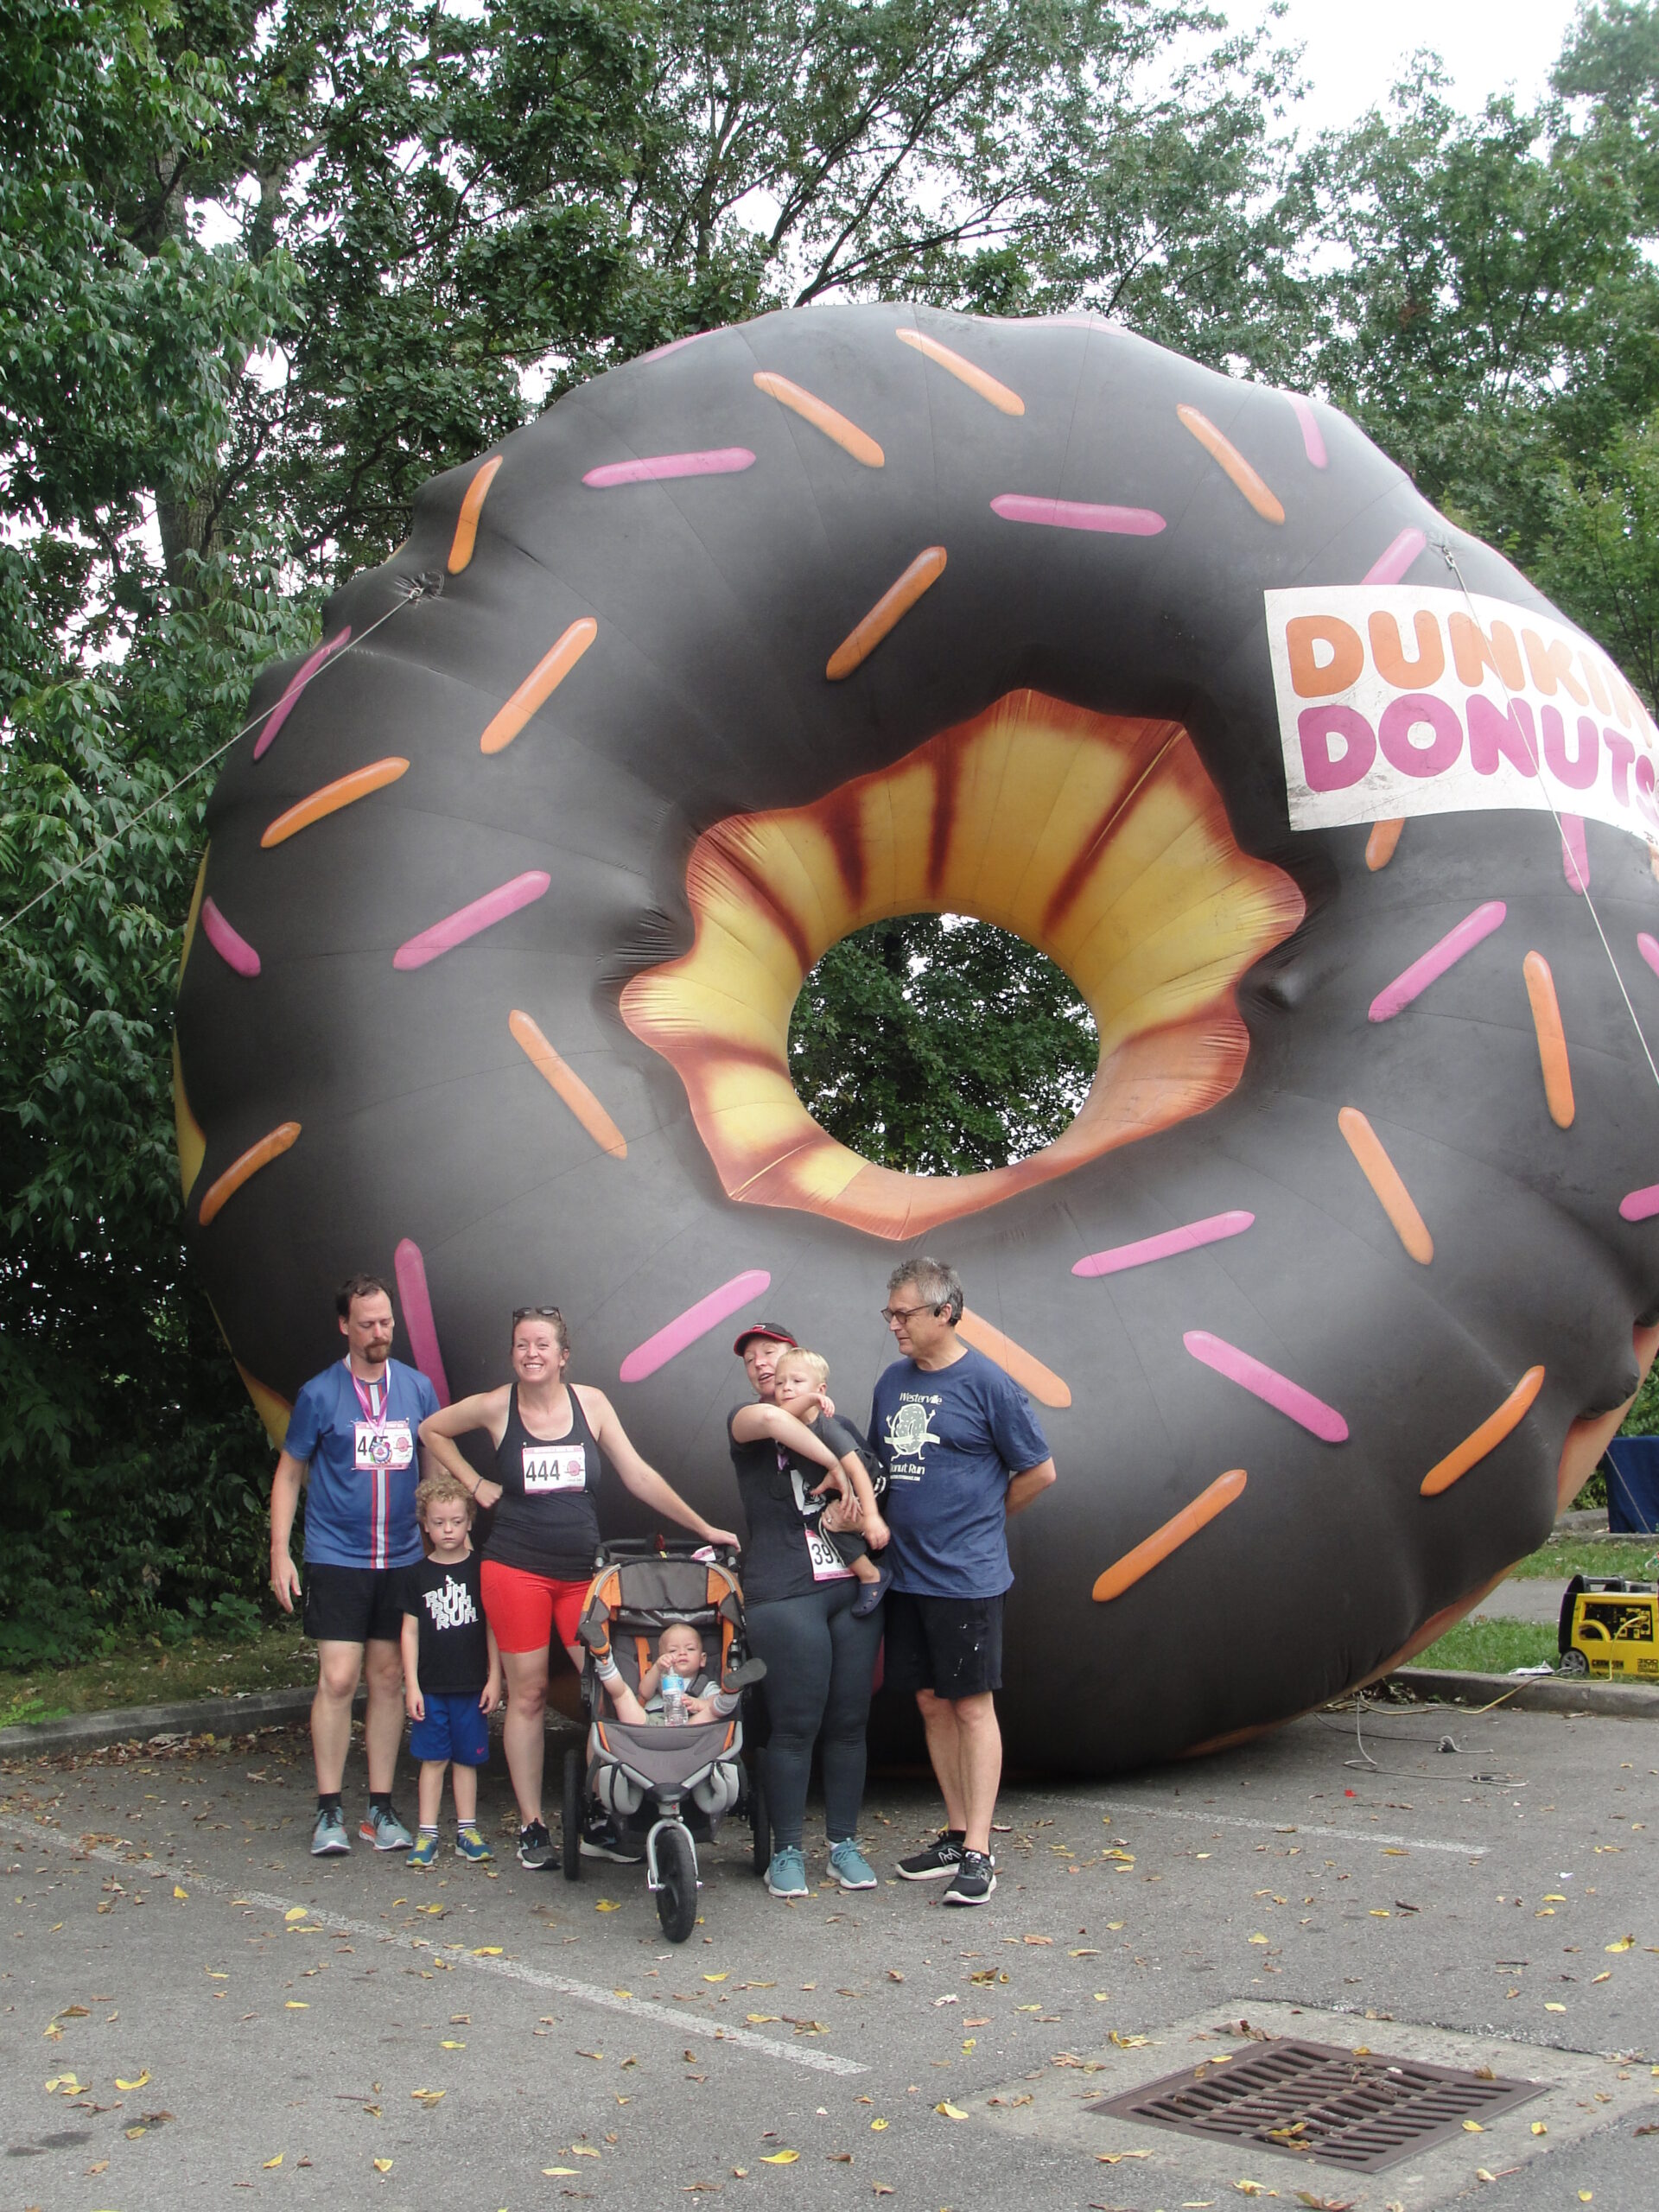 Family Photo - Doughnuts For All Ages - Giant Inflatable Donut - Westerville Donut Run - Columbus Donut Run - USA Race Timing & Event Management - Special Event Rentals - https://www.specialevent-rentals.com/ - https://runsignup.com/Race/OH/Columbus/ColumbusDonutRun - https://www.facebook.com/ColumbusDonutRun/